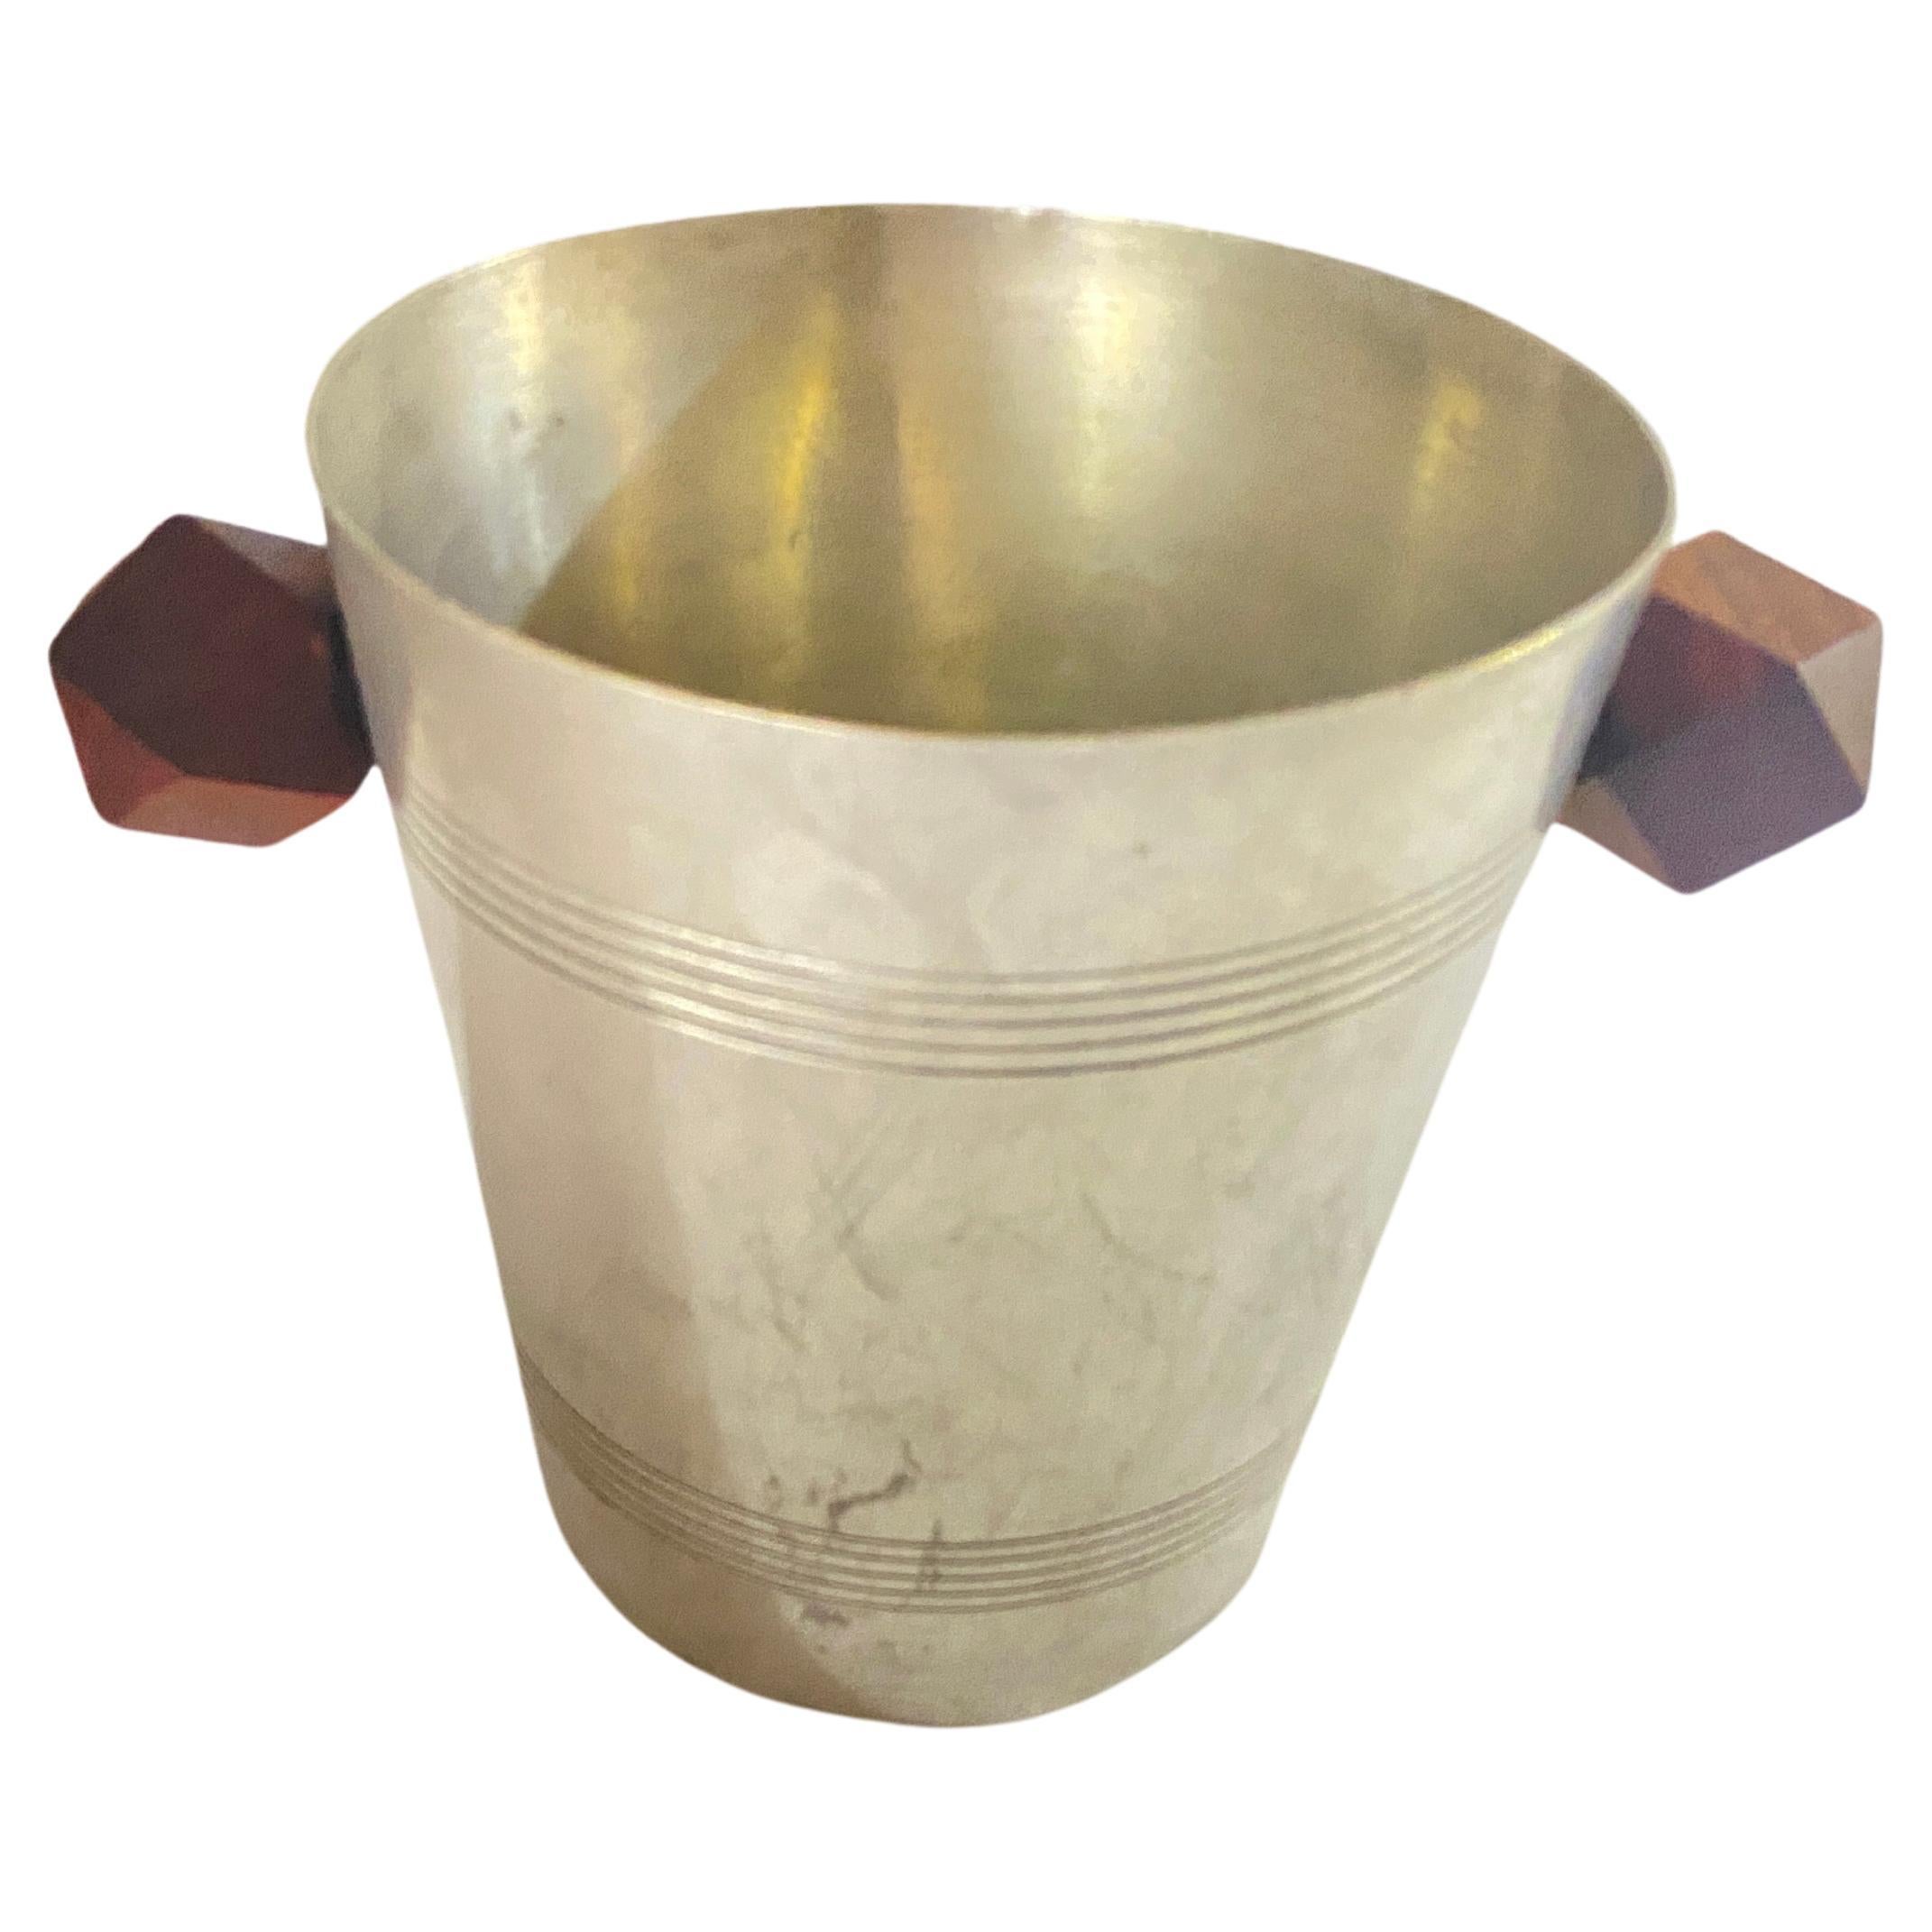 This ice bucket is in gold and silver metal, with wood Handles. It comes from France, and has been made circa 1930.
Beautiful old patina, and Art Deco style.